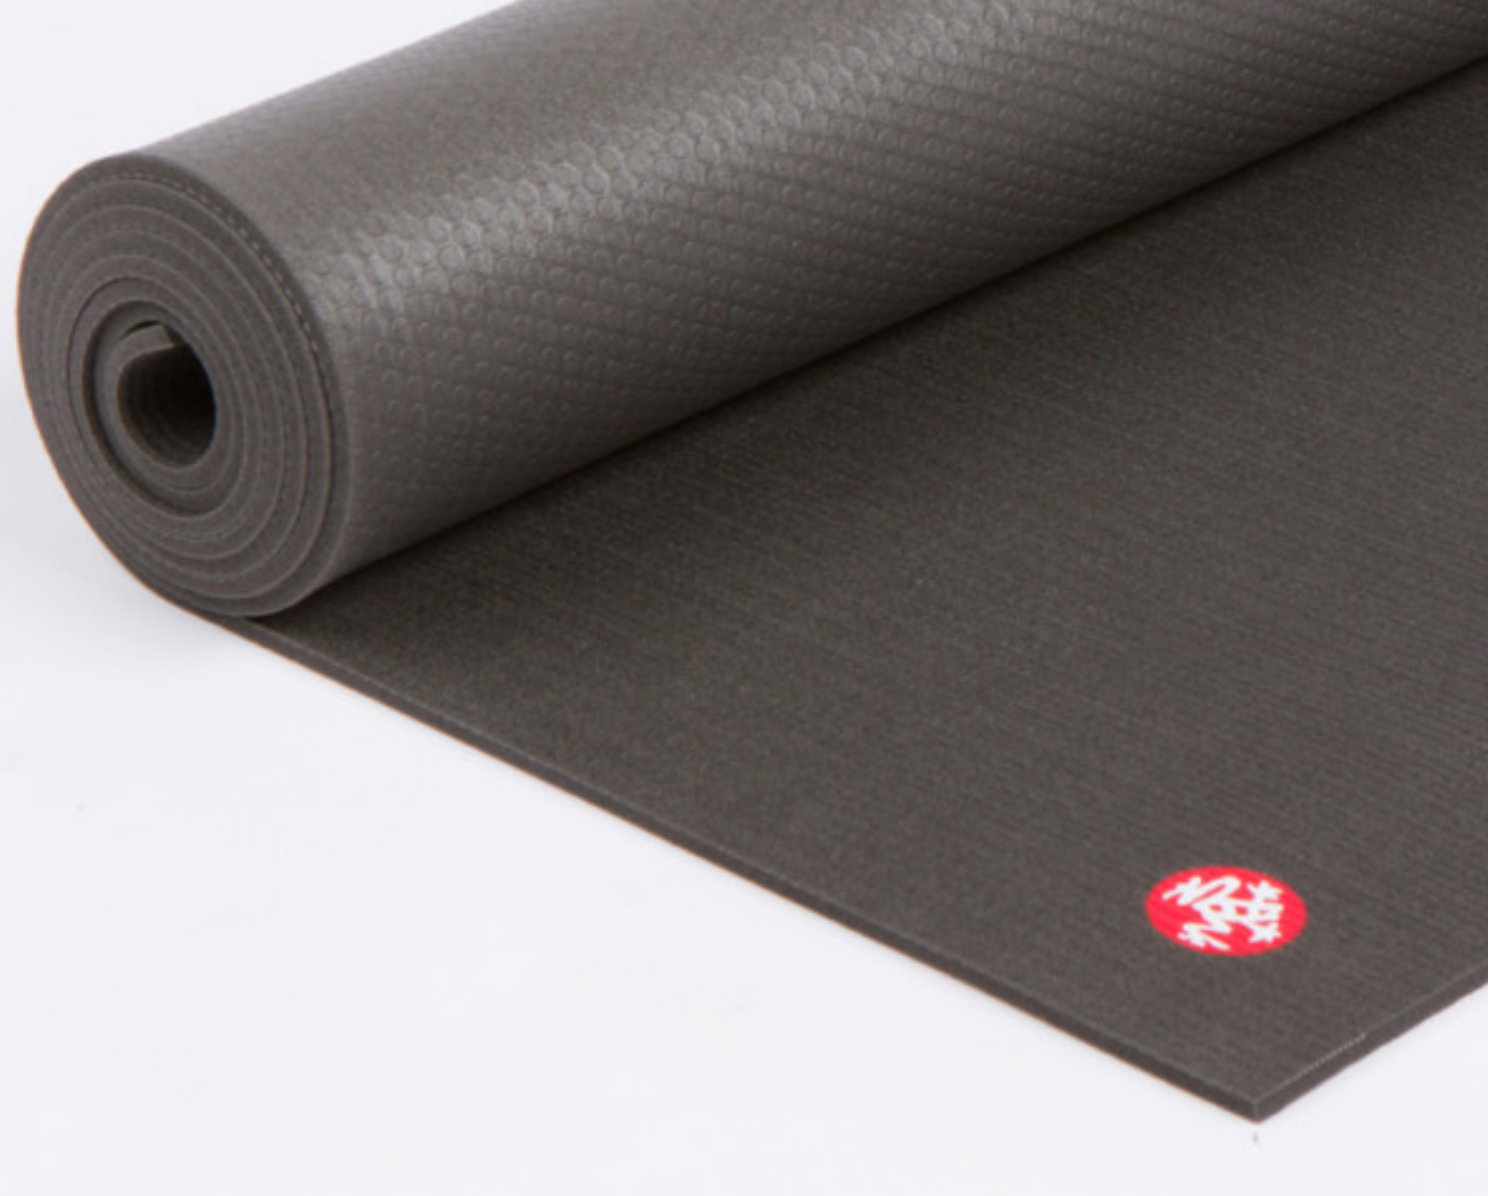 which yoga mat